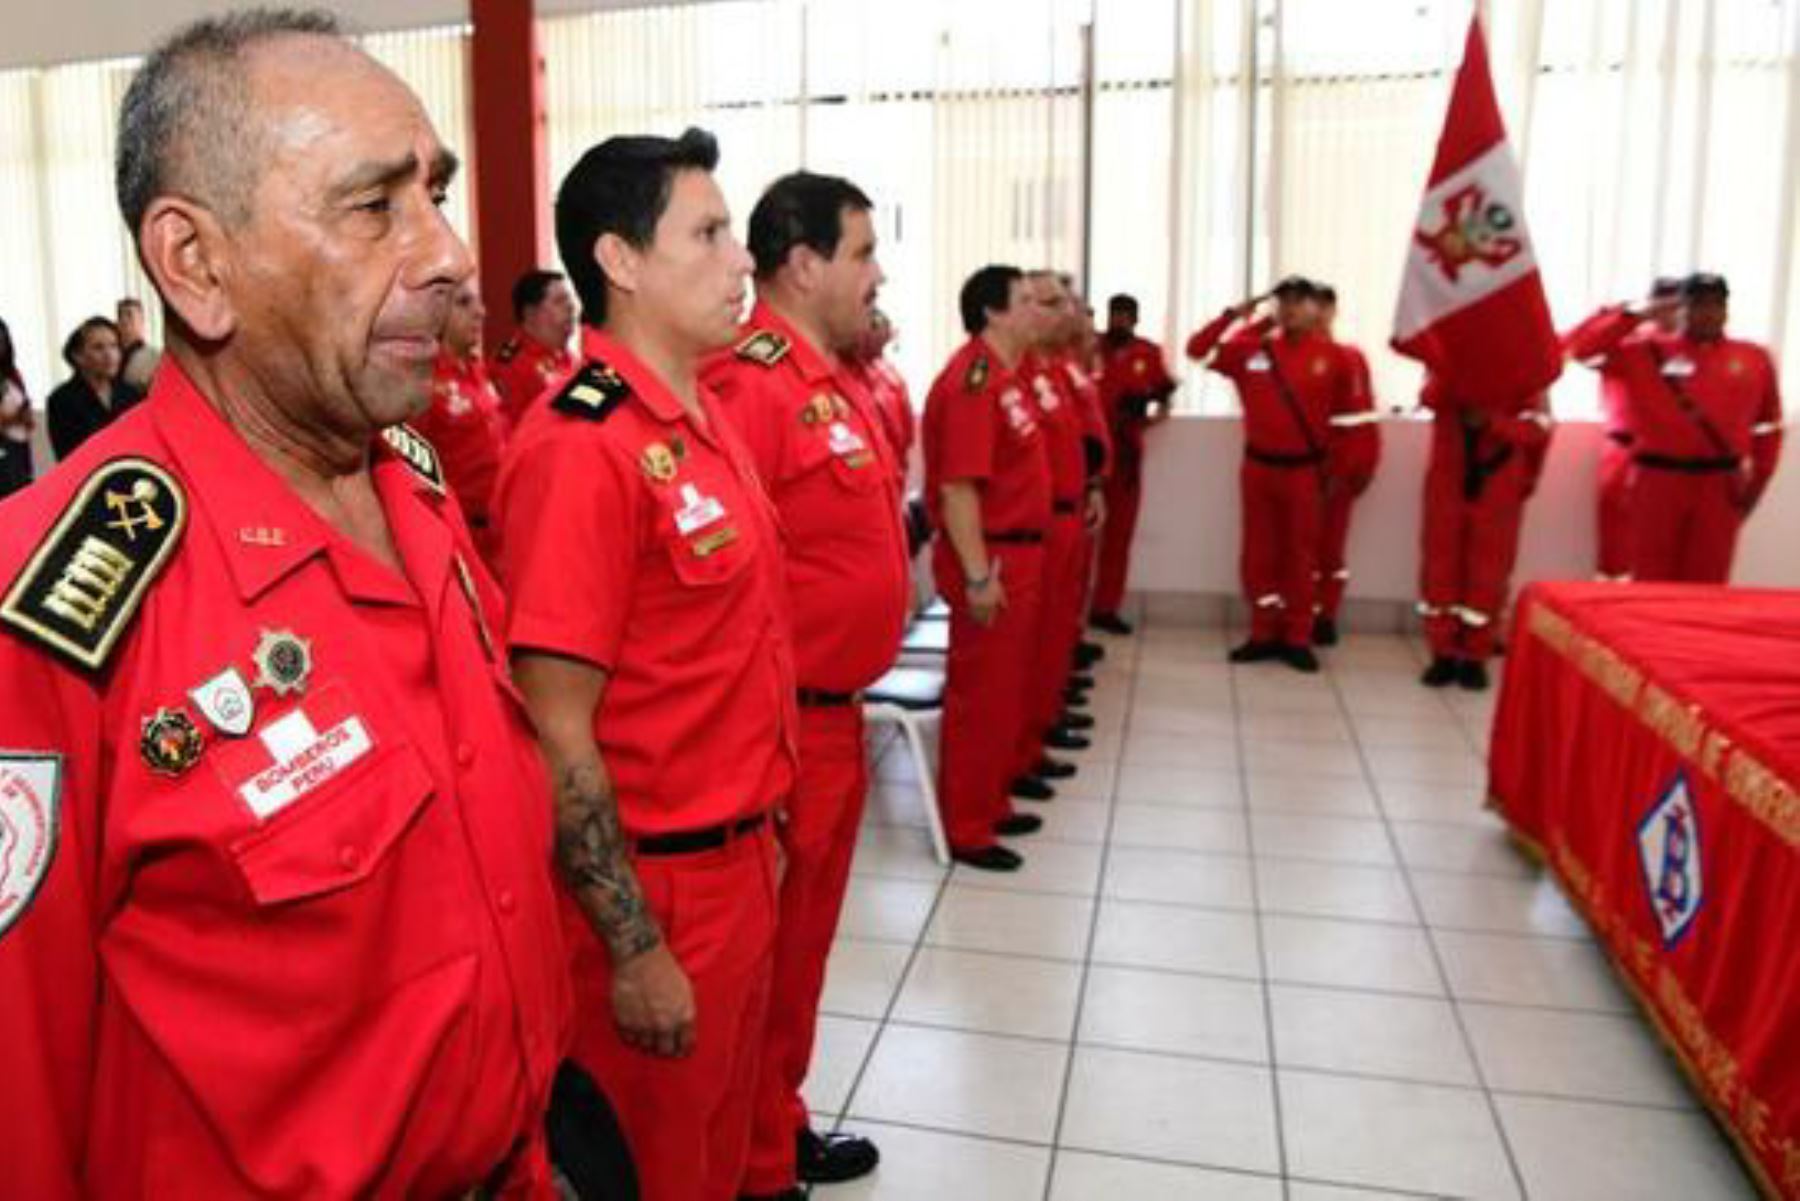 Peru: Gov't highlights vocation of volunteer firefighters on their 162nd anniversary